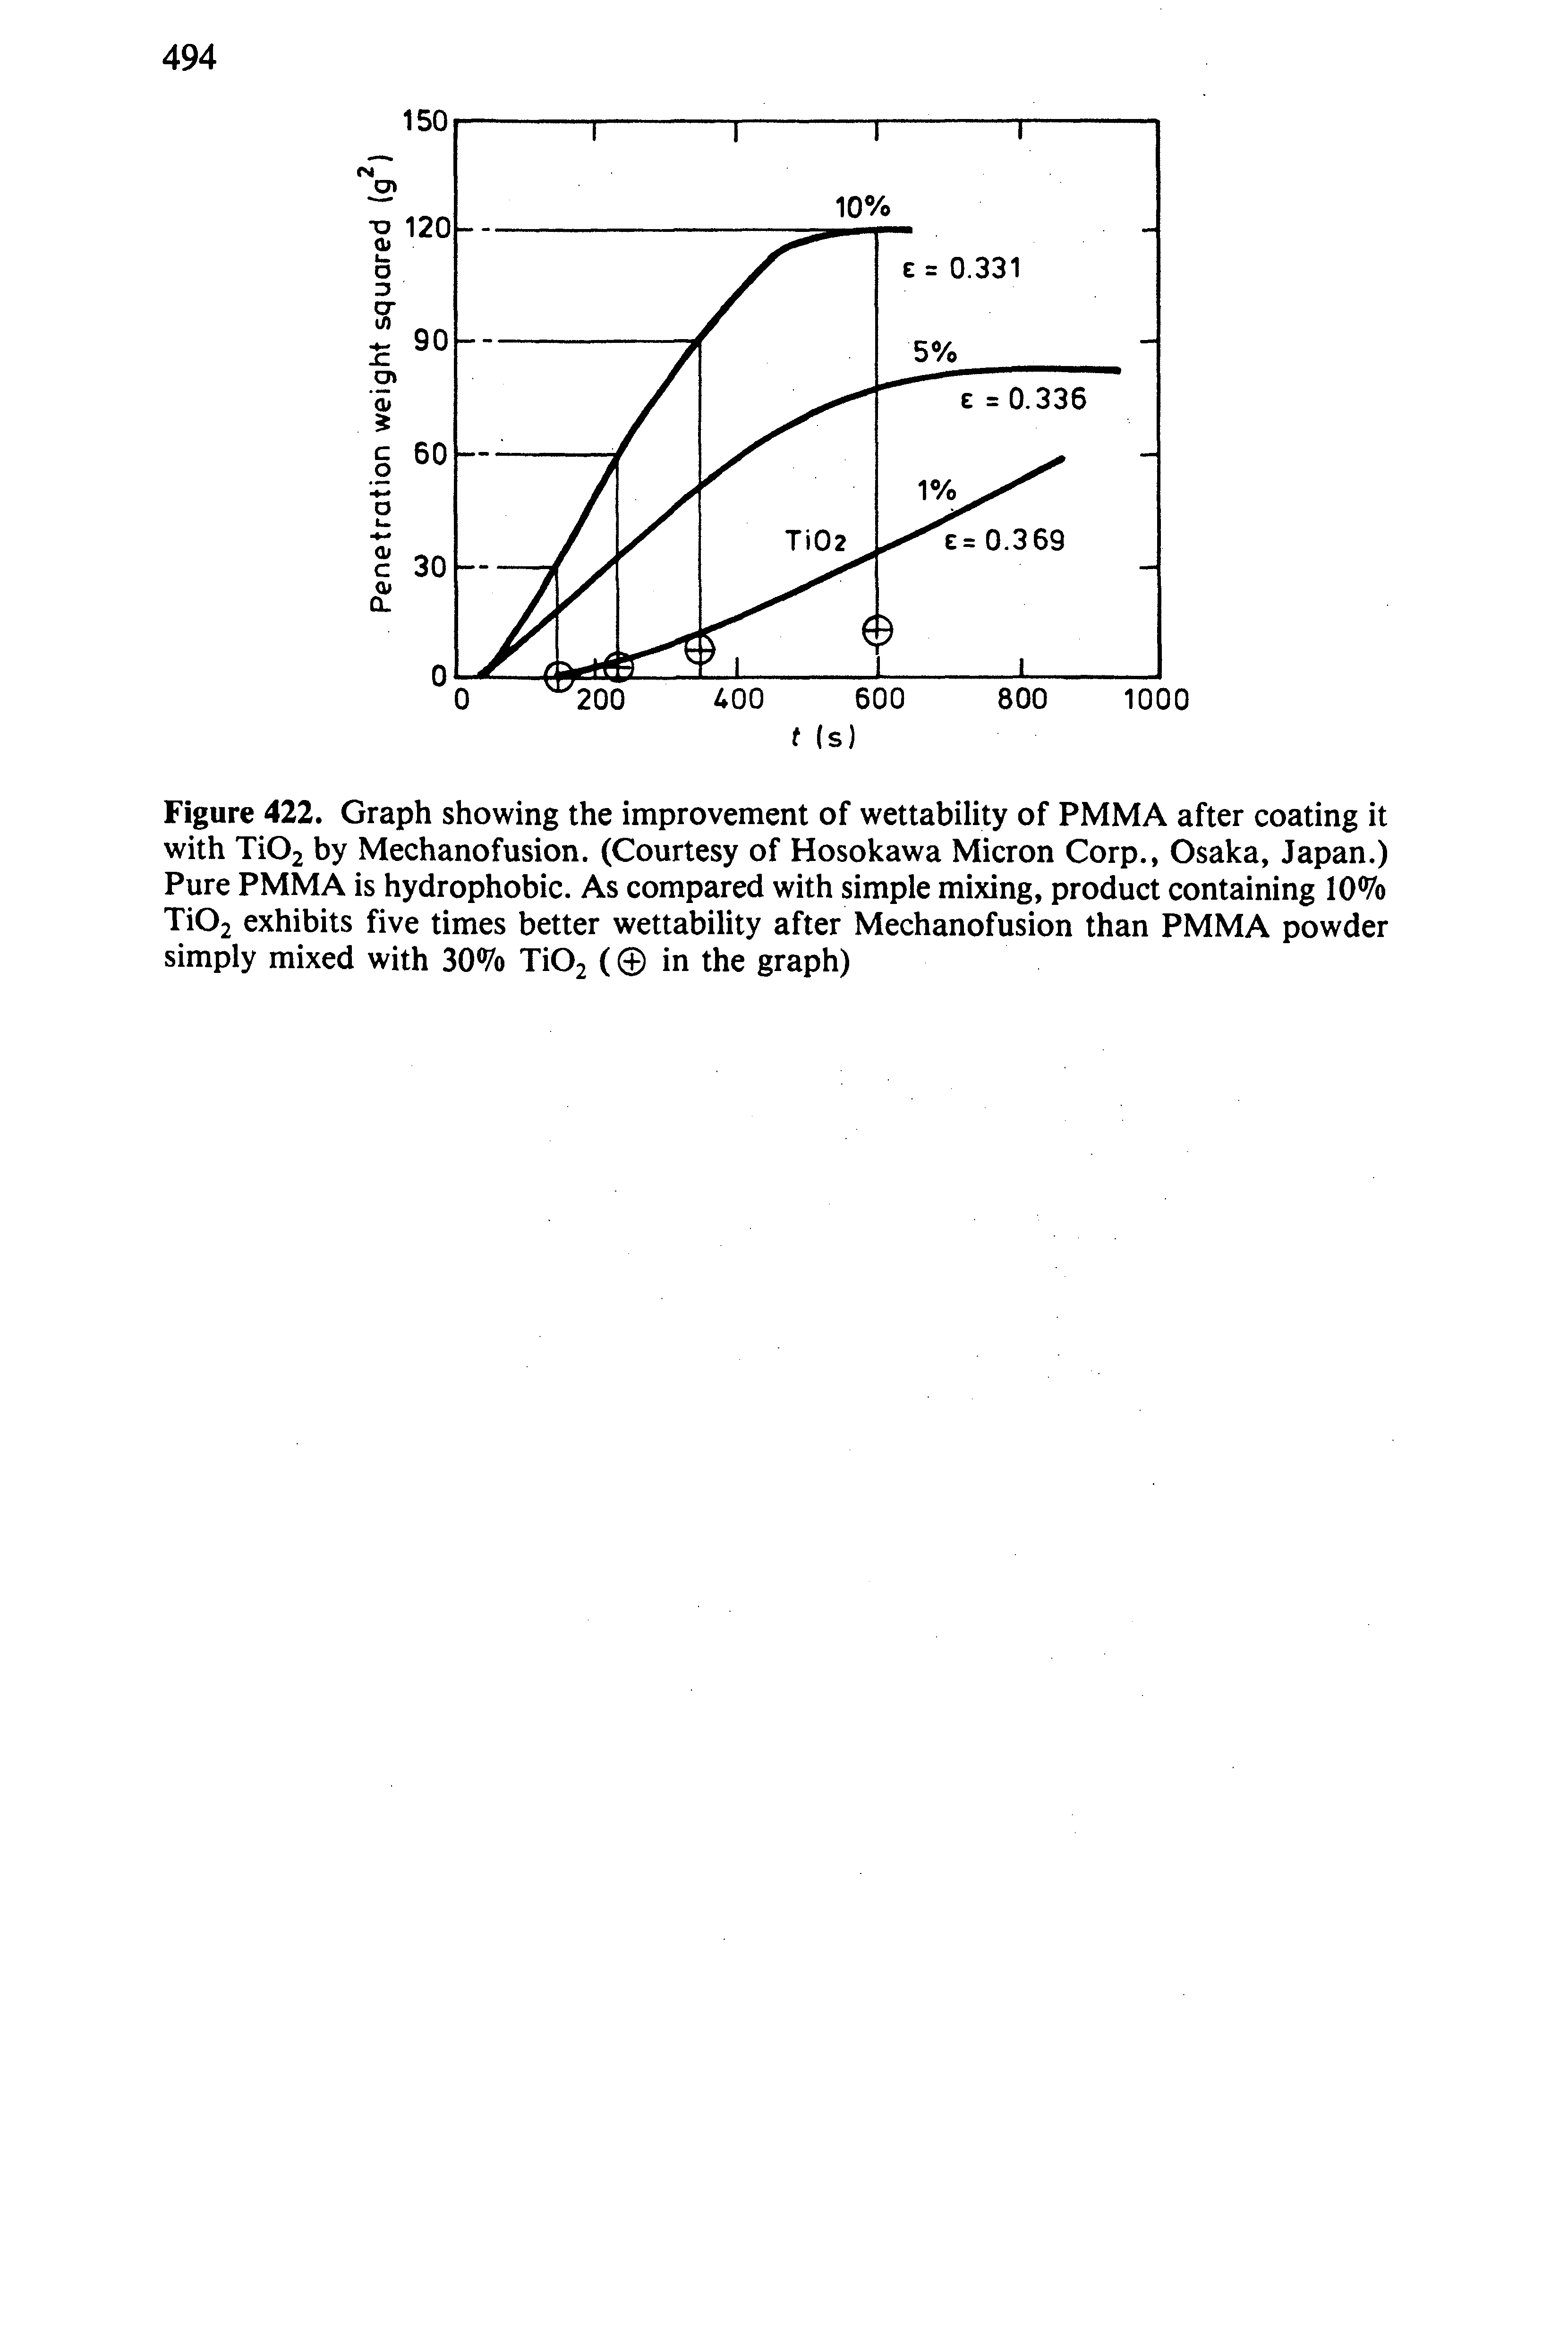 Figure 422. Graph showing the improvement of wettability of PMMA after coating it with Ti02 by Mechanofusion. (Courtesy of Hosokawa Micron Corp., Osaka, Japan.) Pure PMMA is hydrophobic. As compared with simple mixing, product containing 10% Ti02 exhibits five times better wettability after Mechanofusion than PMMA powder simply mixed with 30% Ti02 ( in the graph)...